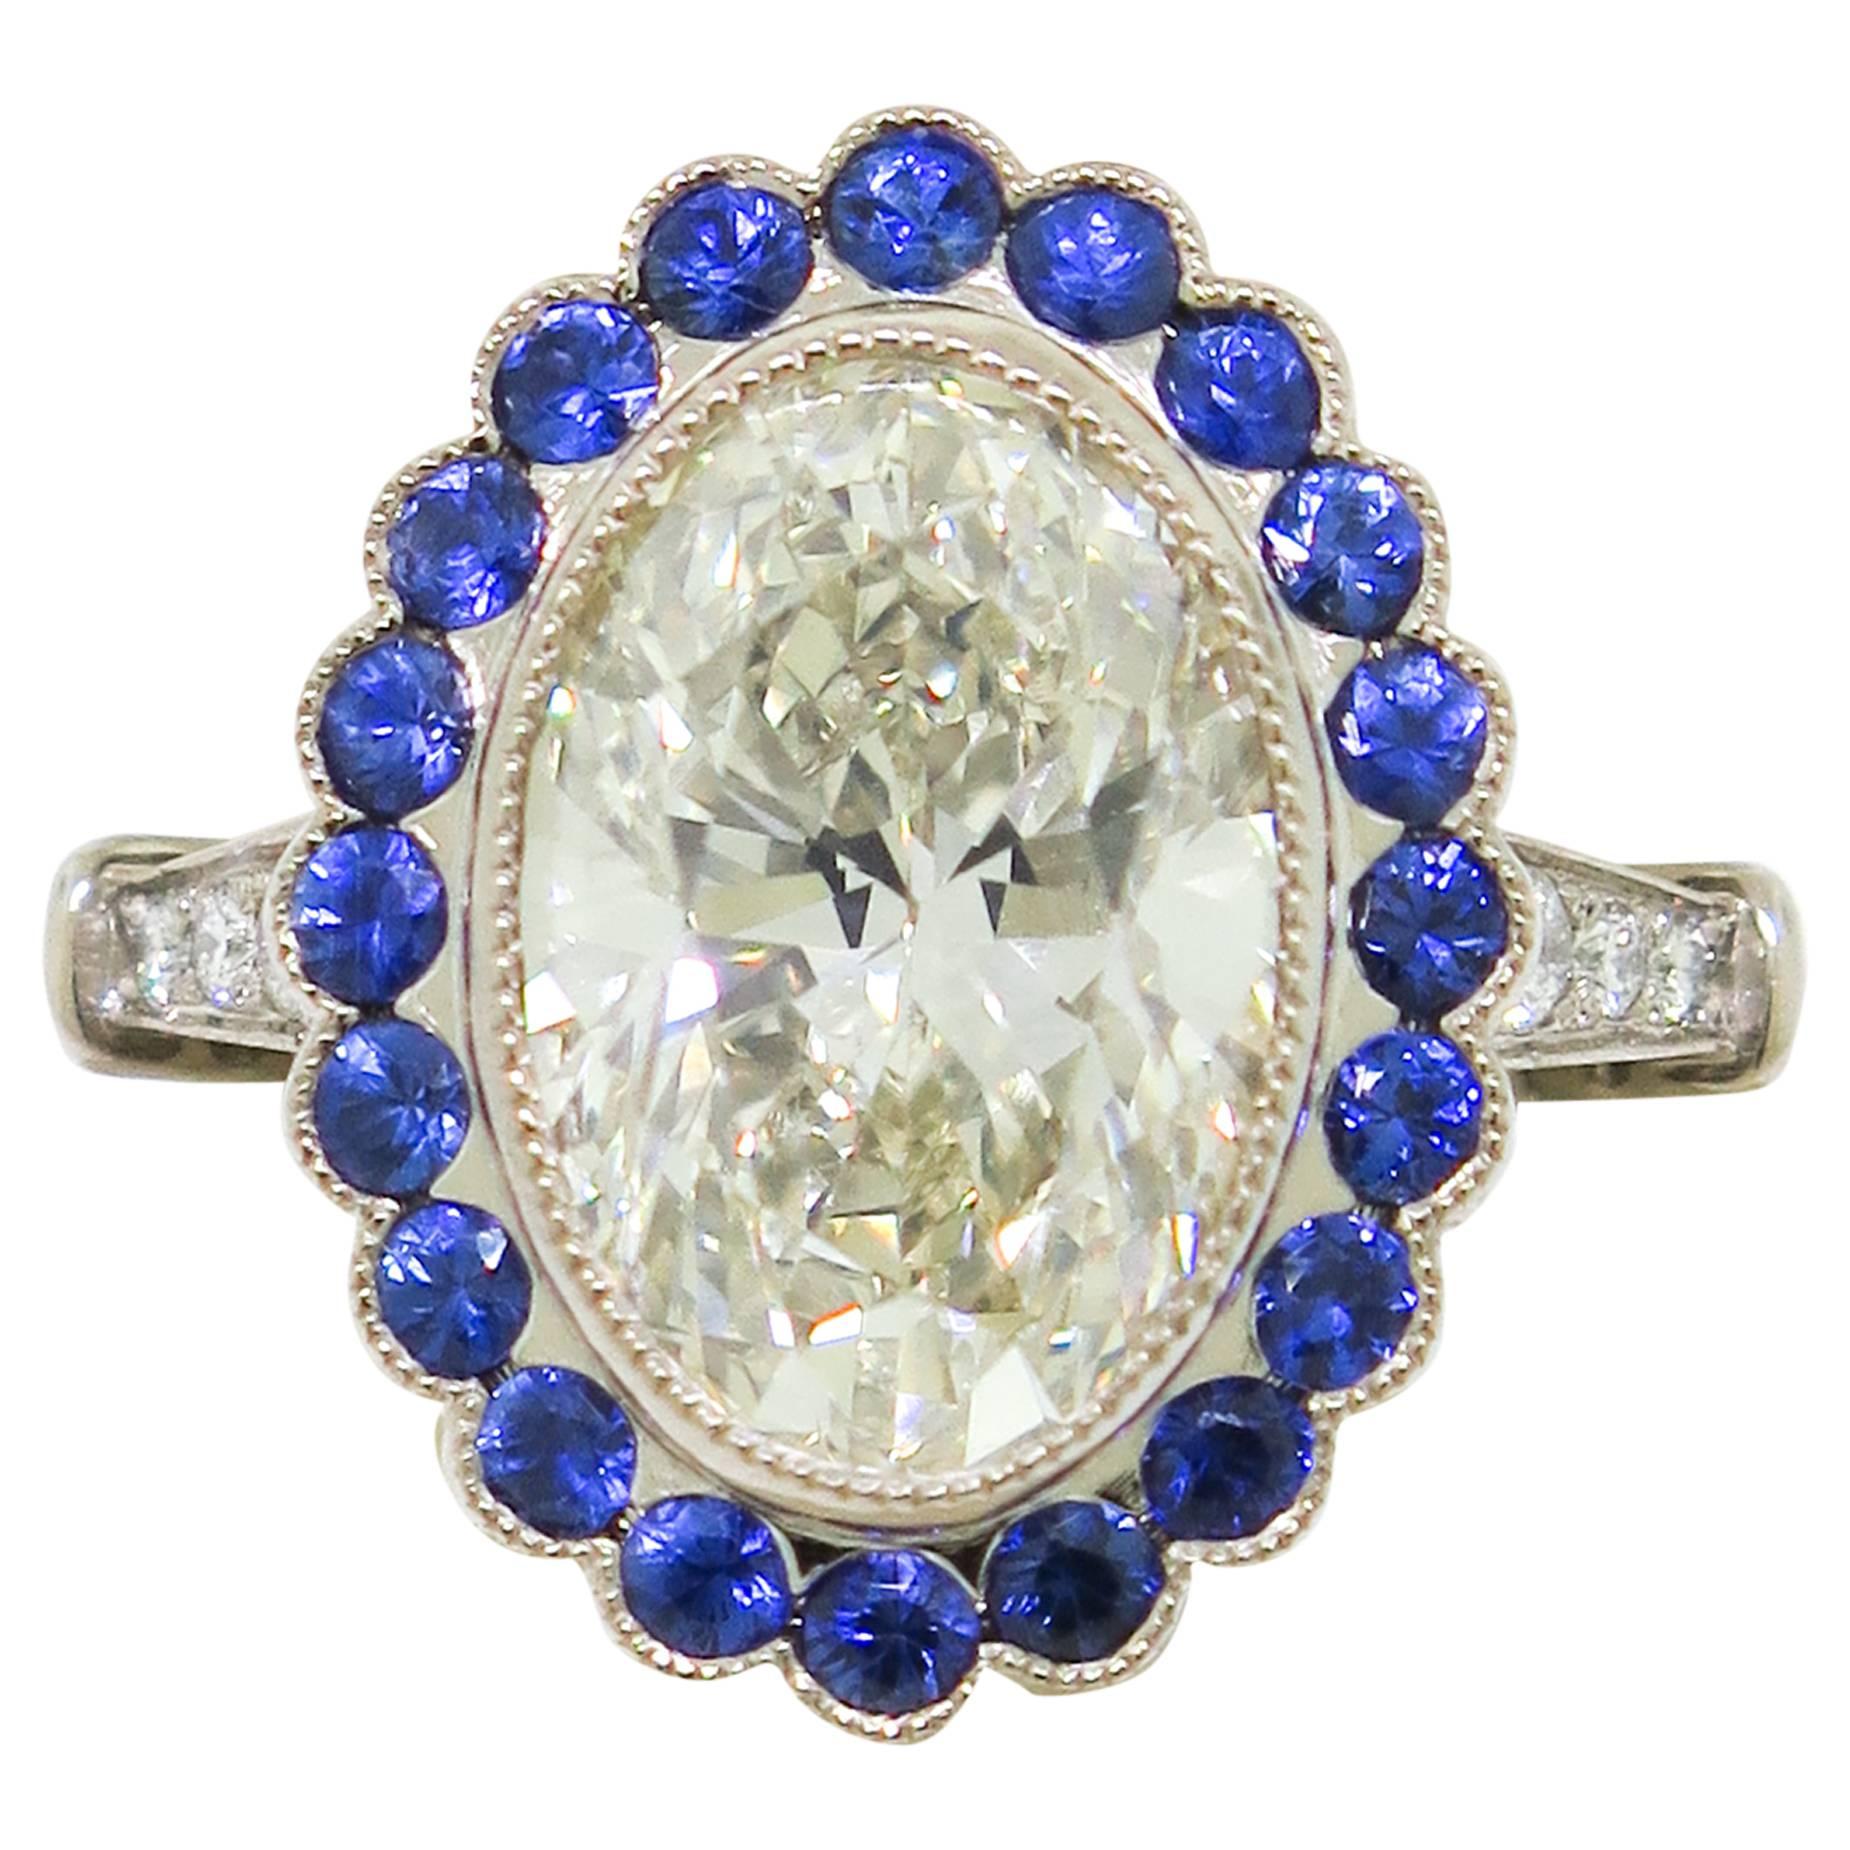 3.37 Carat Oval Diamond with Sapphire Halo White Gold Ring